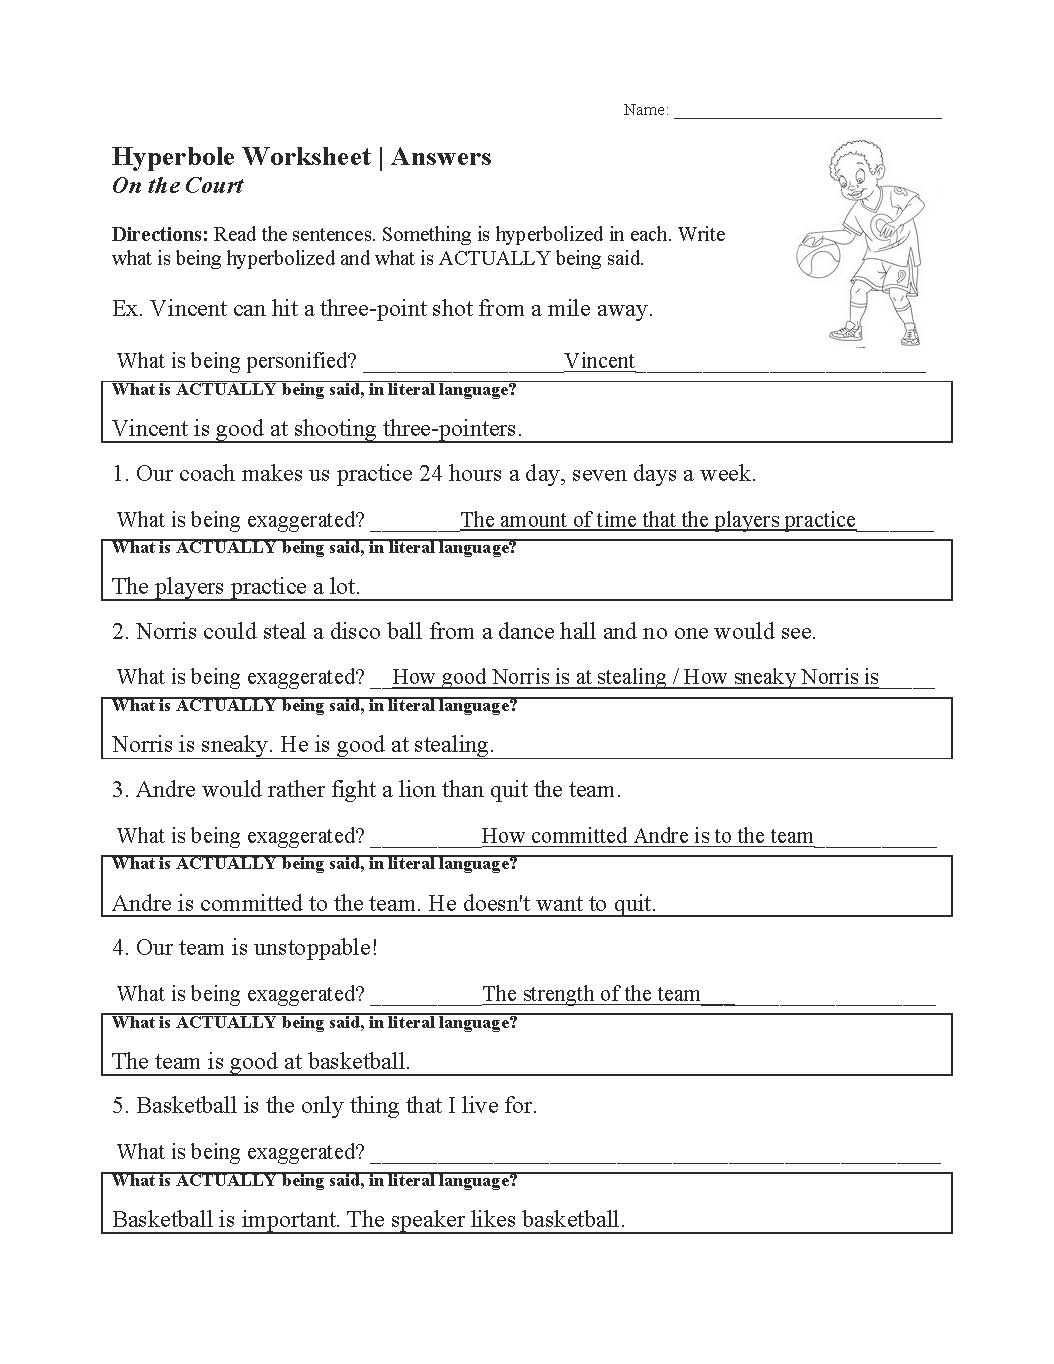 This is a preview image of our Hyperbole Worksheet. Click on it to enlarge or view the source file.